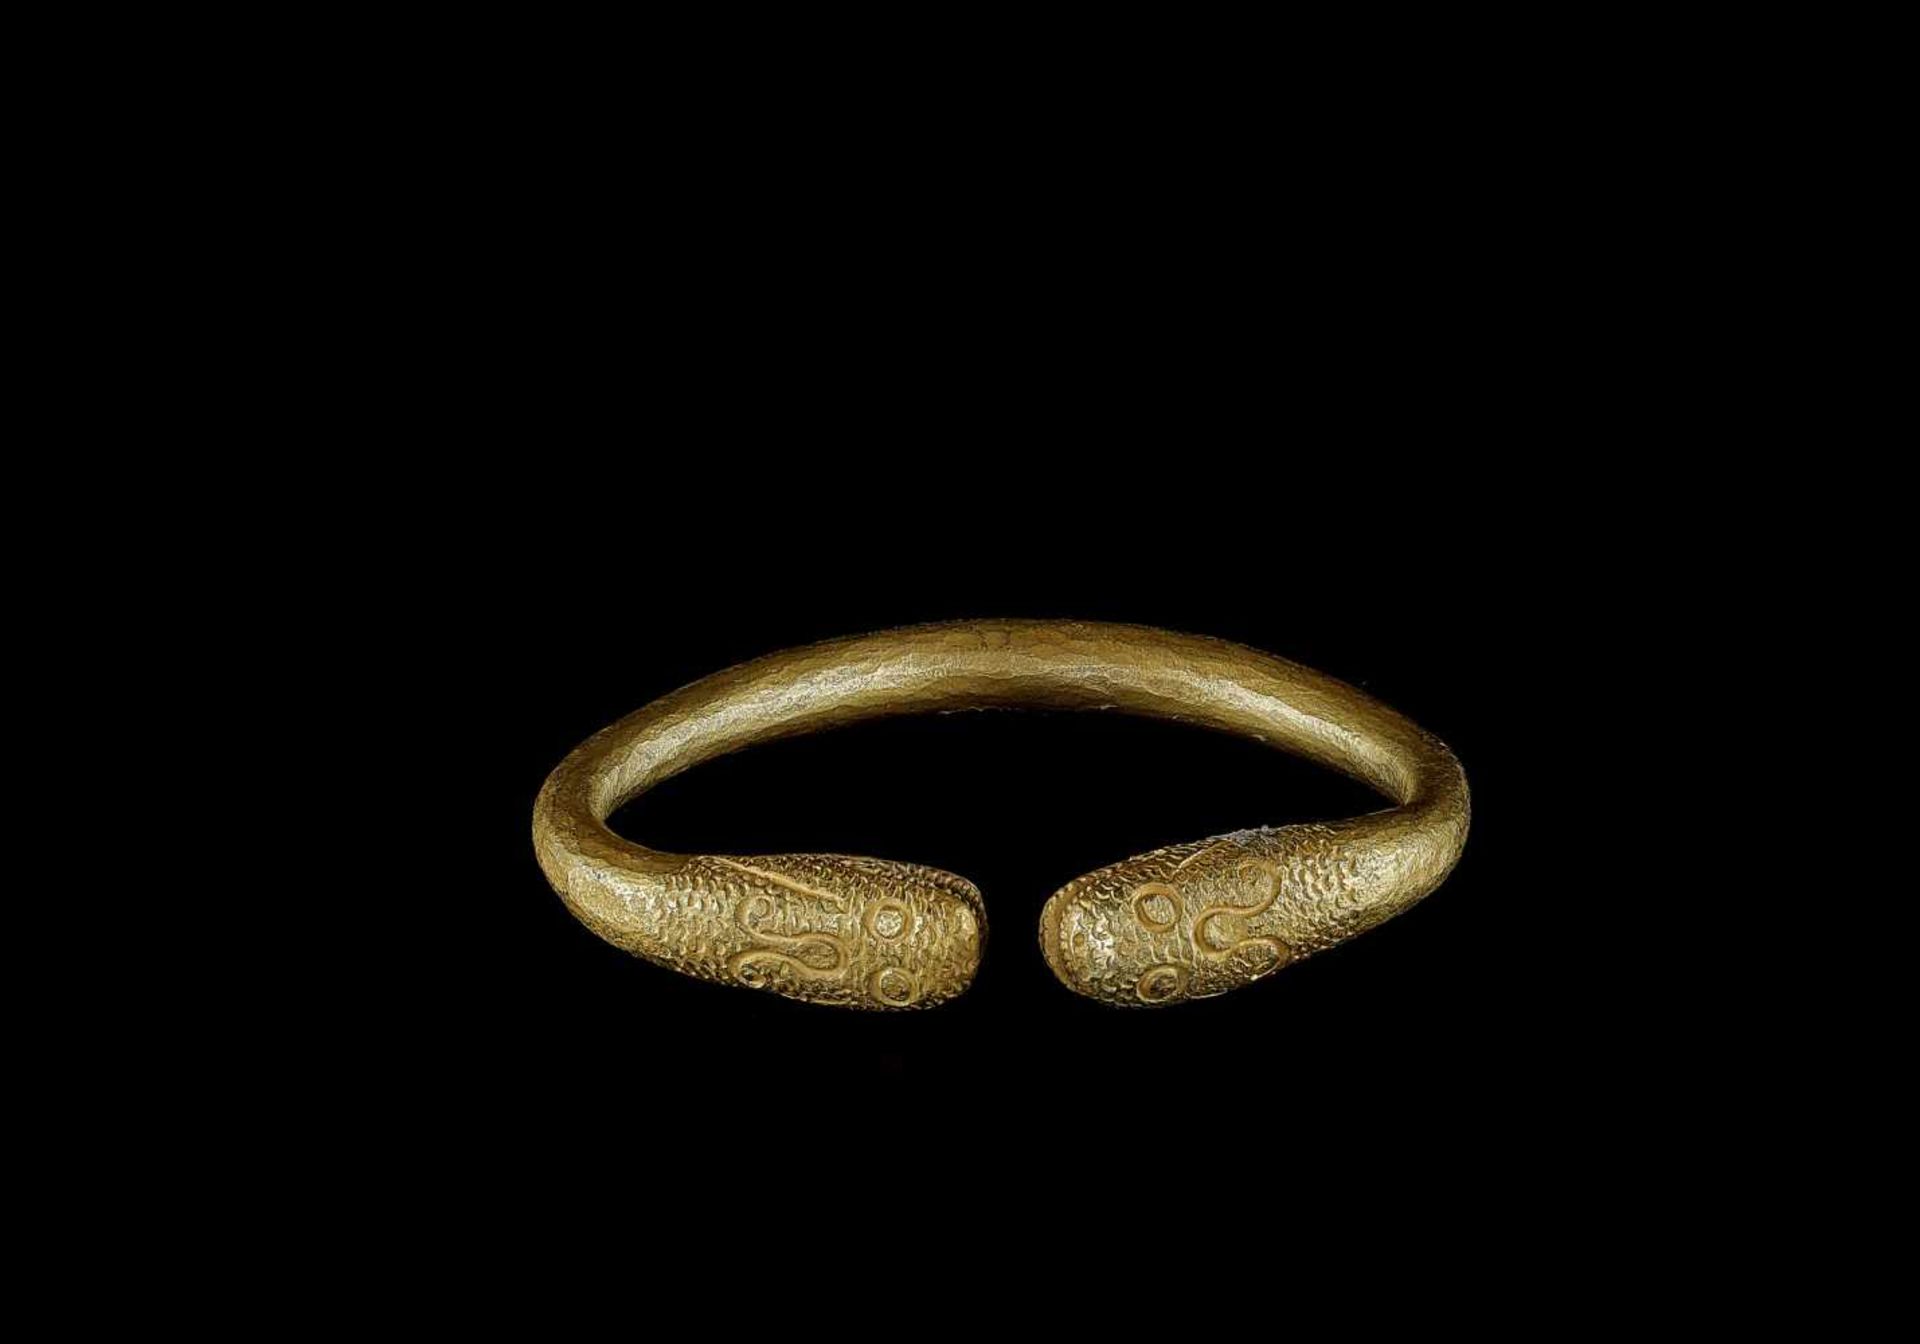 A MASSIVE INDIAN GOLD BANGLE WITH SNAKE HEADS Northern India, c. 17th – 18th century. The massive - Image 5 of 5